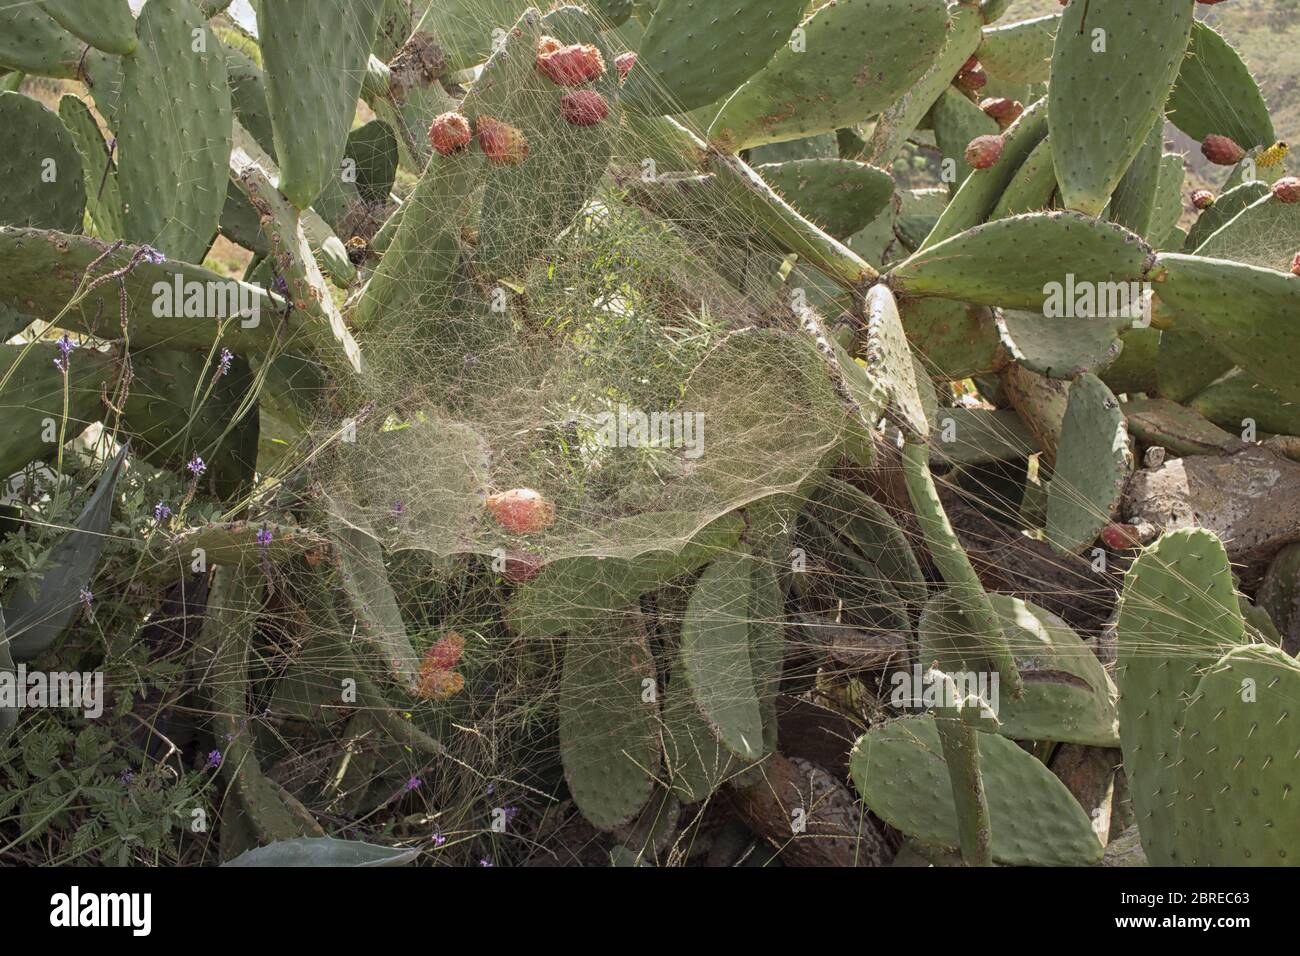 Chumbera nopal cactus in bloom with spider web Stock Photo